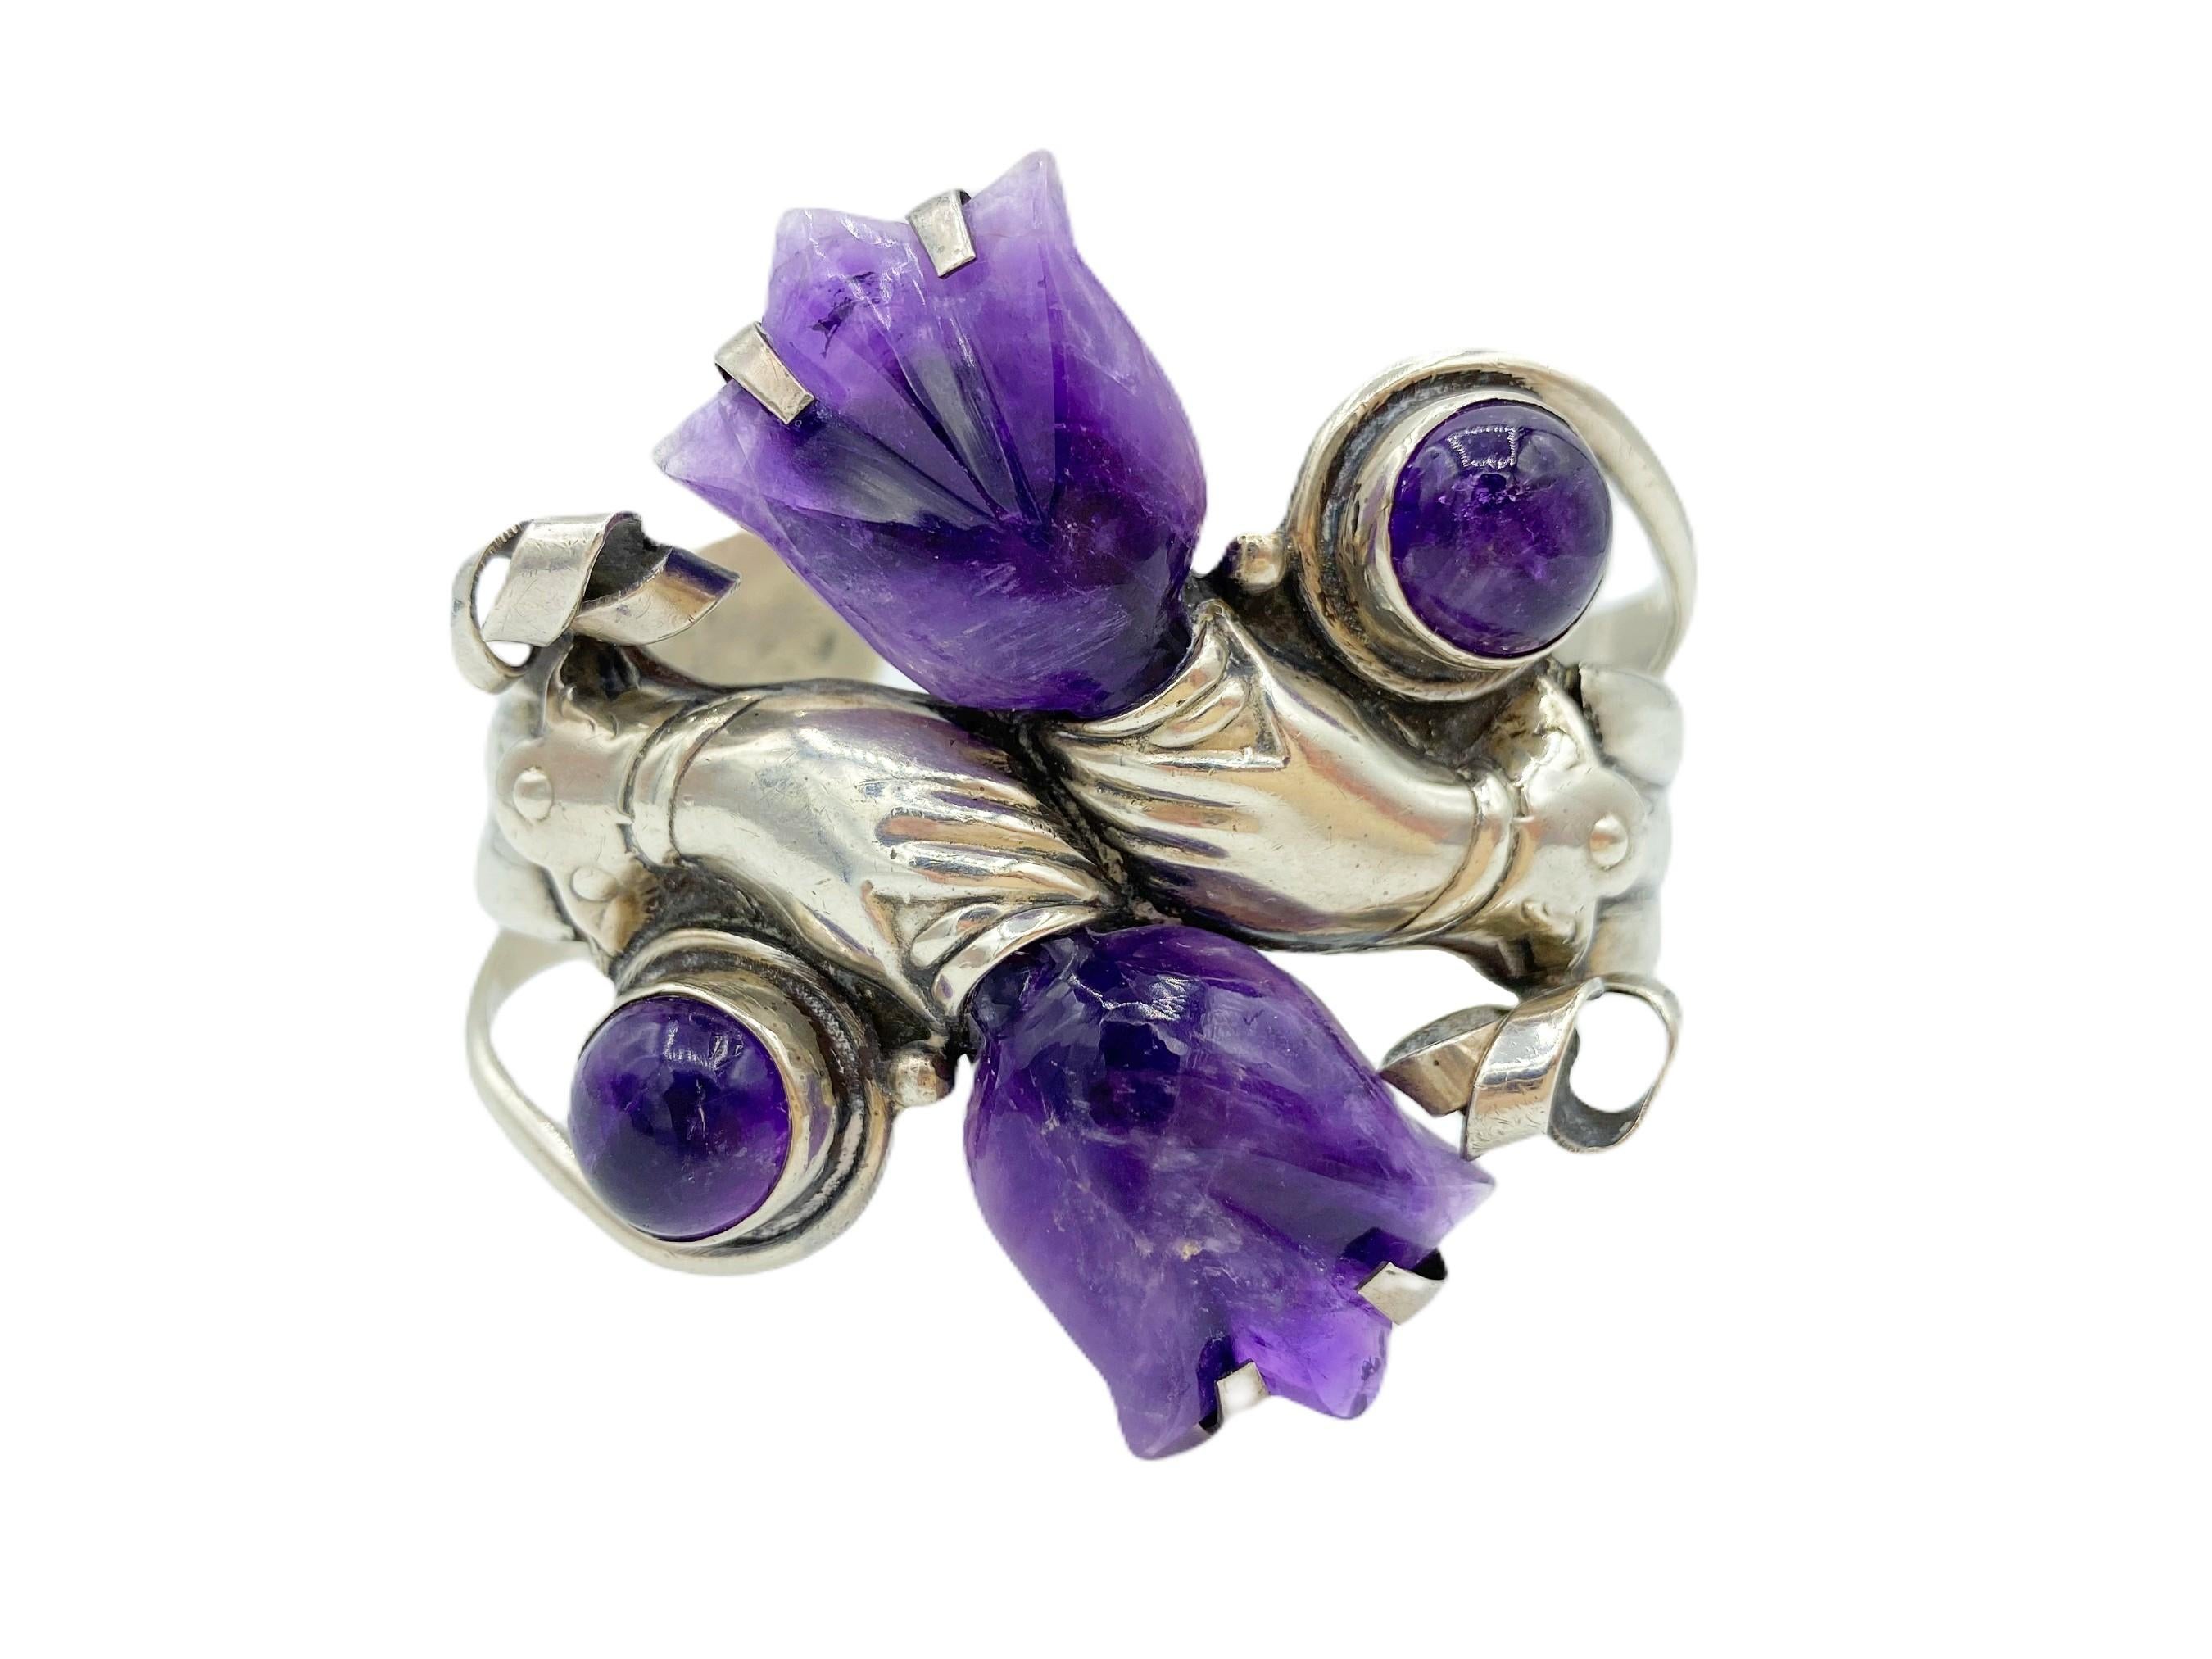 Remarkably crafted, this stunning vintage amethyst and sterling silver cuff bracelet is sure to leave a lasting impression. Inspired by an iconic William Spratling design of hands holding tulips, the bracelet features  amethysts carved into tulips,